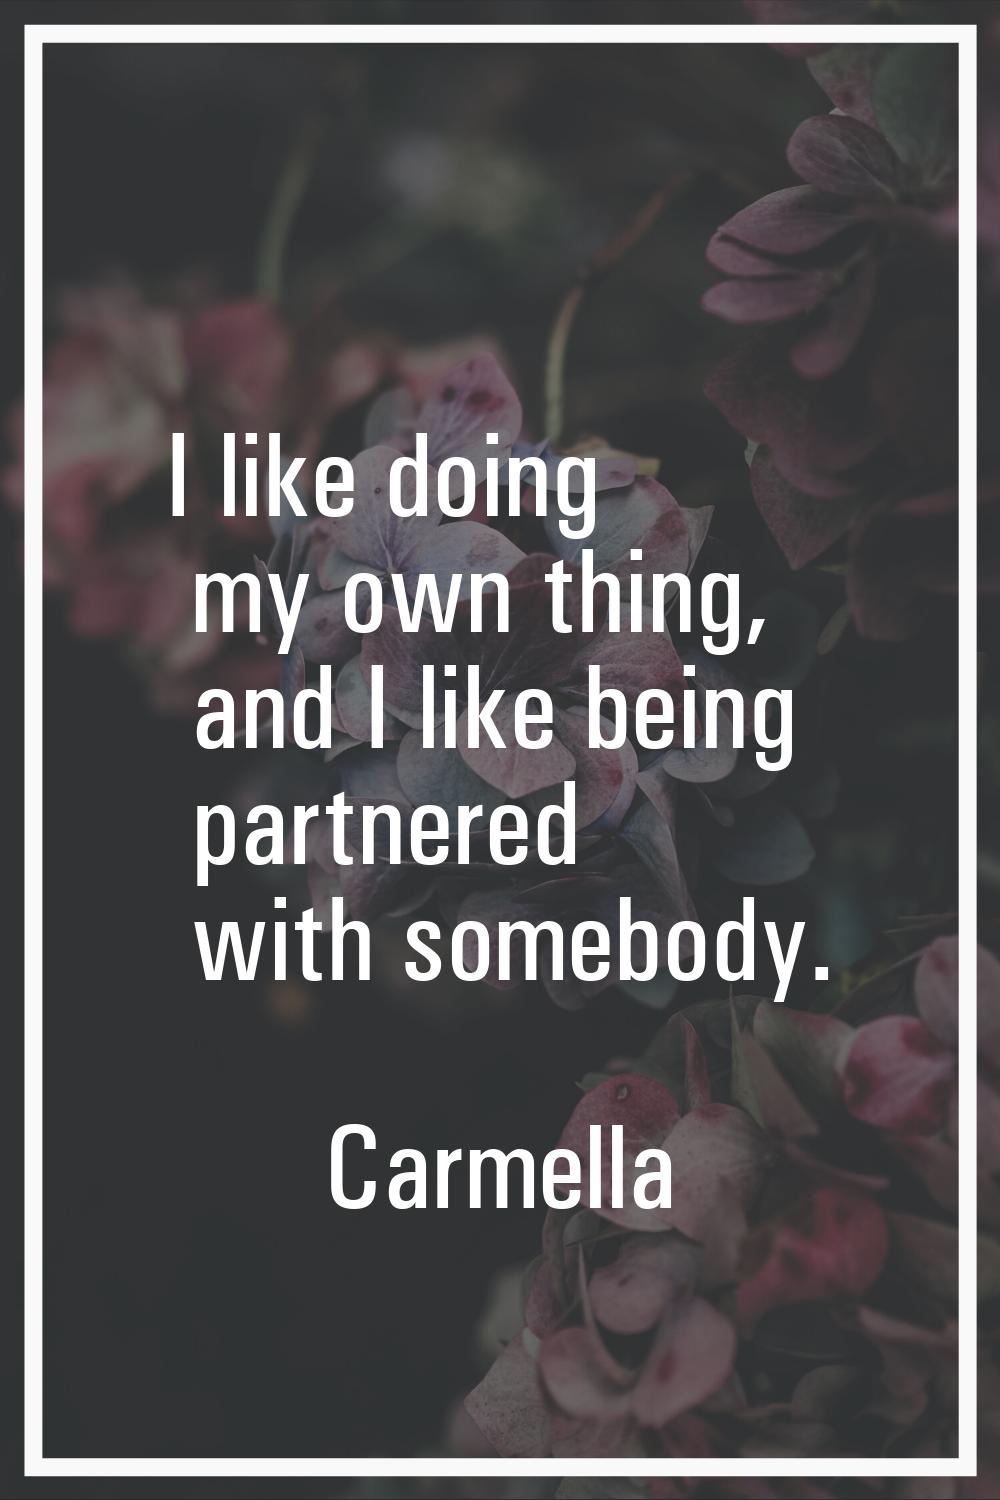 I like doing my own thing, and I like being partnered with somebody.